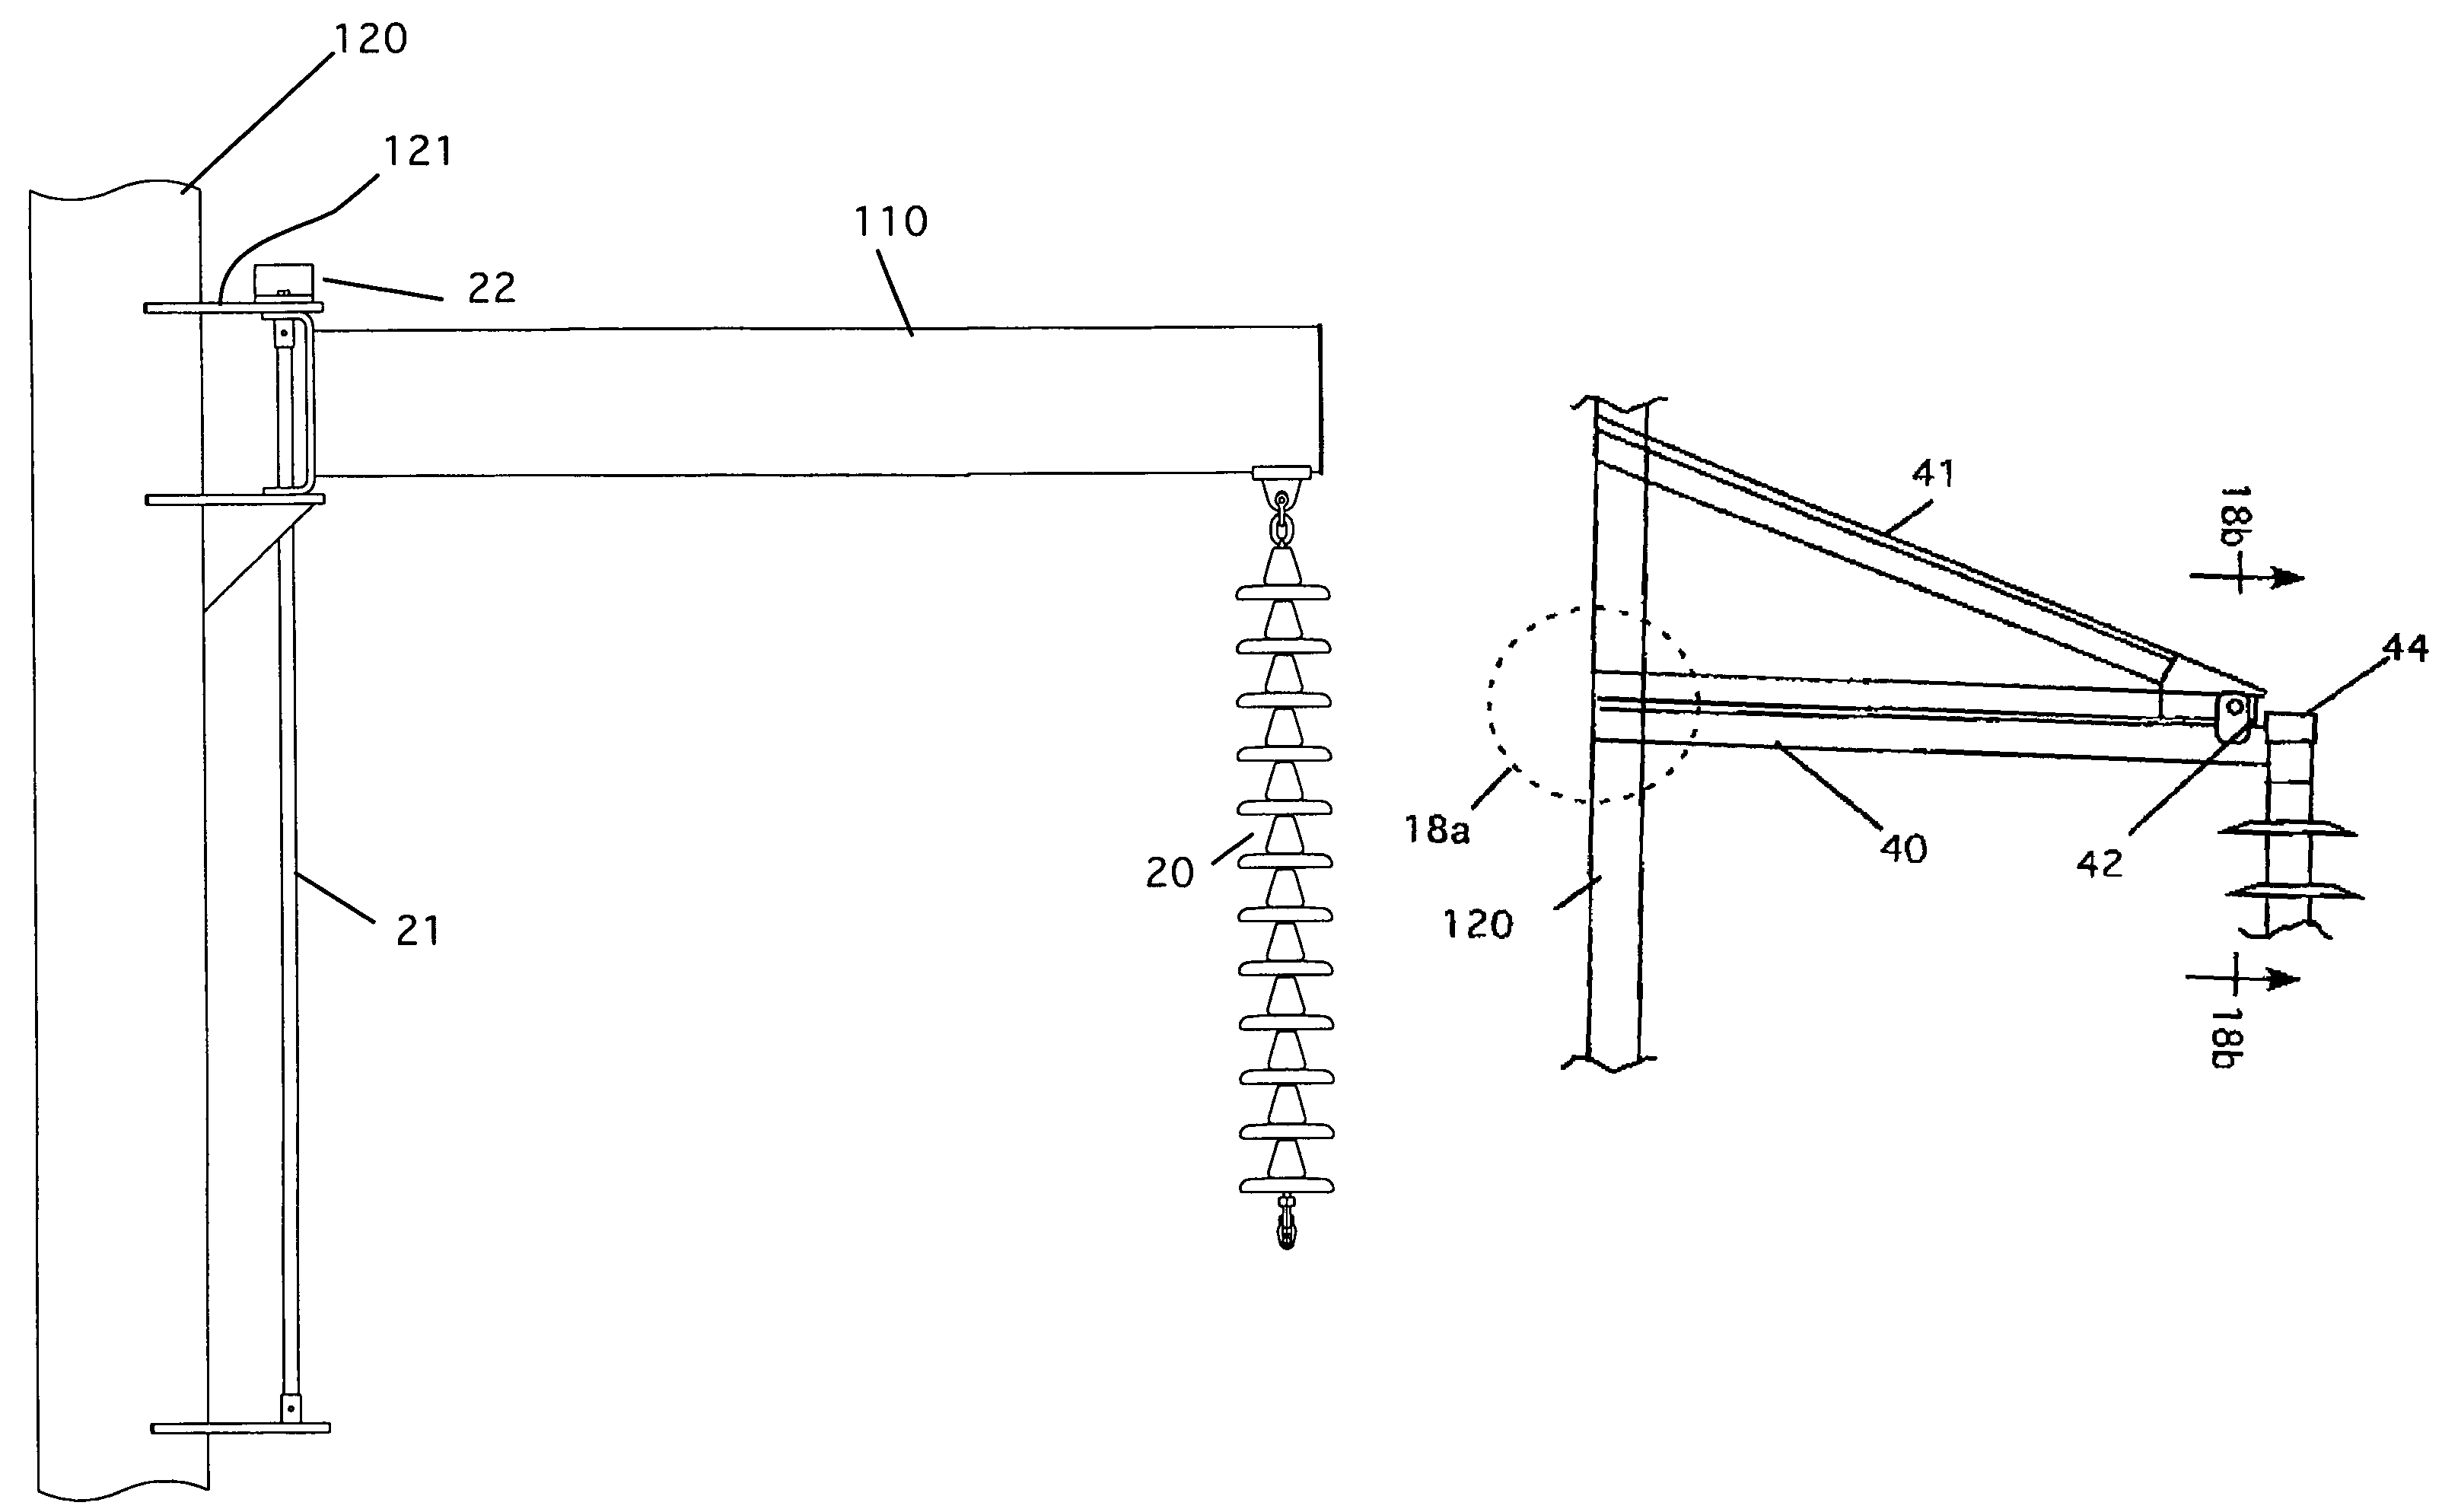 Transmission tower devices for reducing longitudinal shock loads